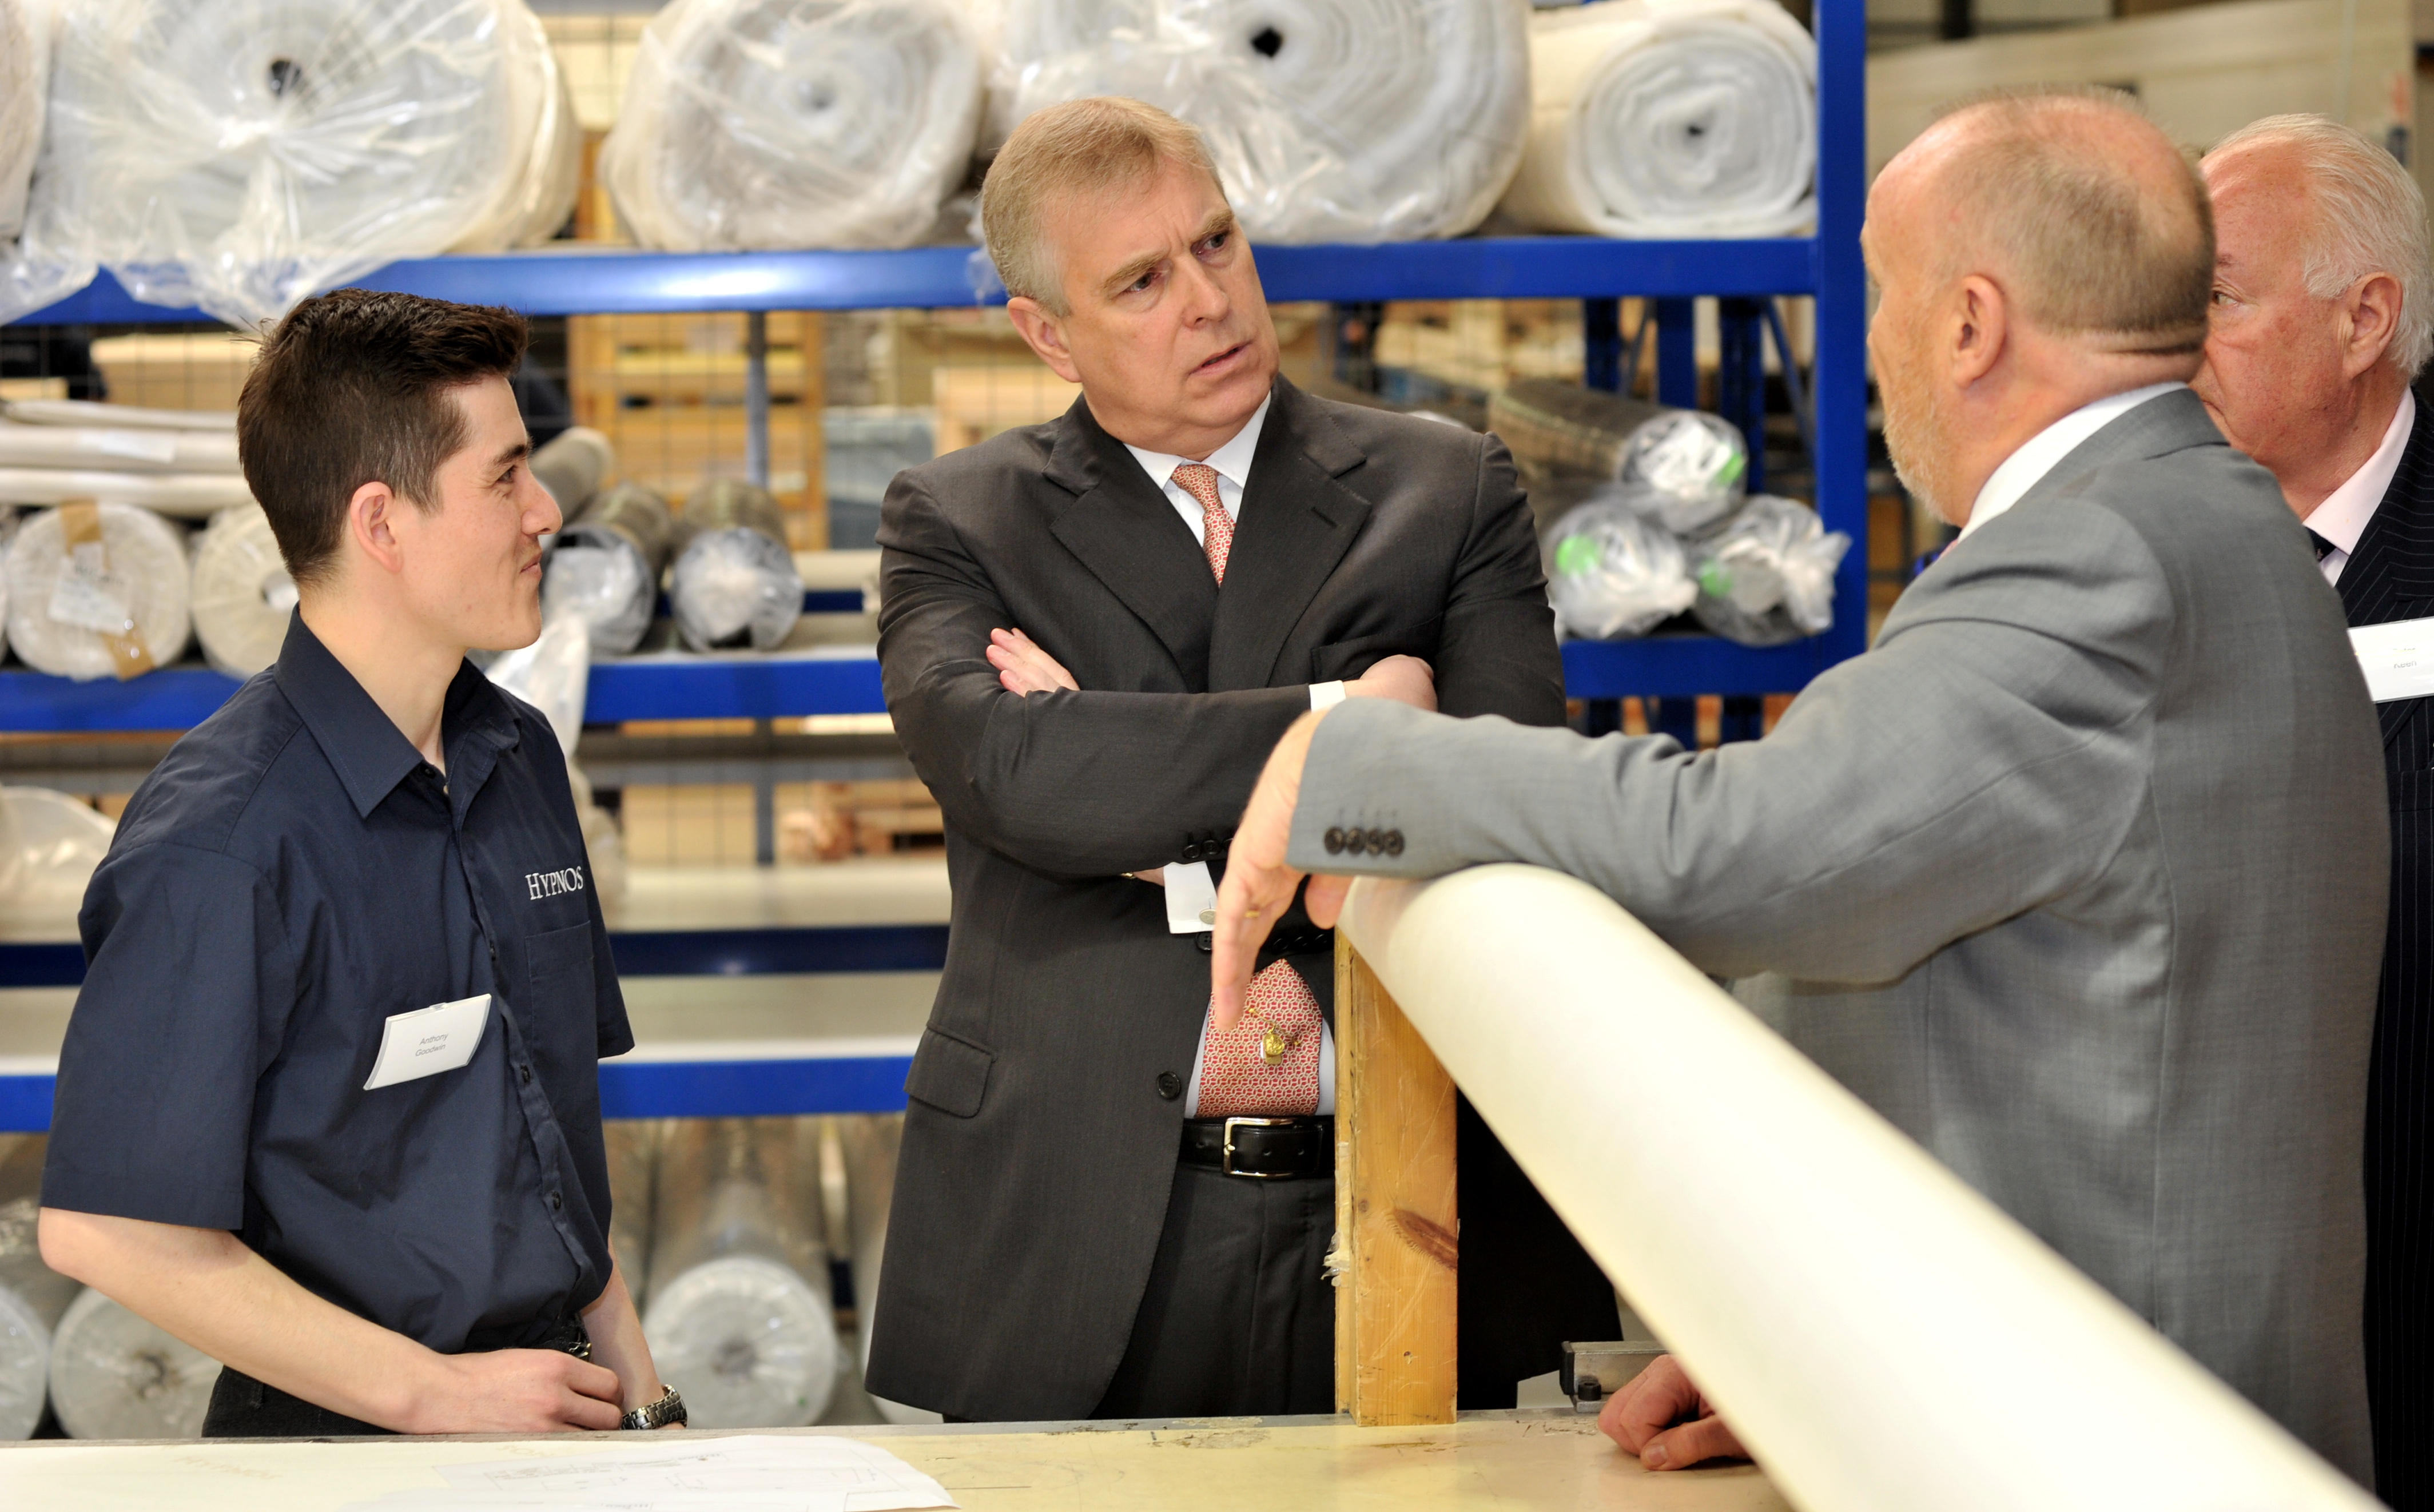 Hypnos Beds leads the way with Apprenticeship programme